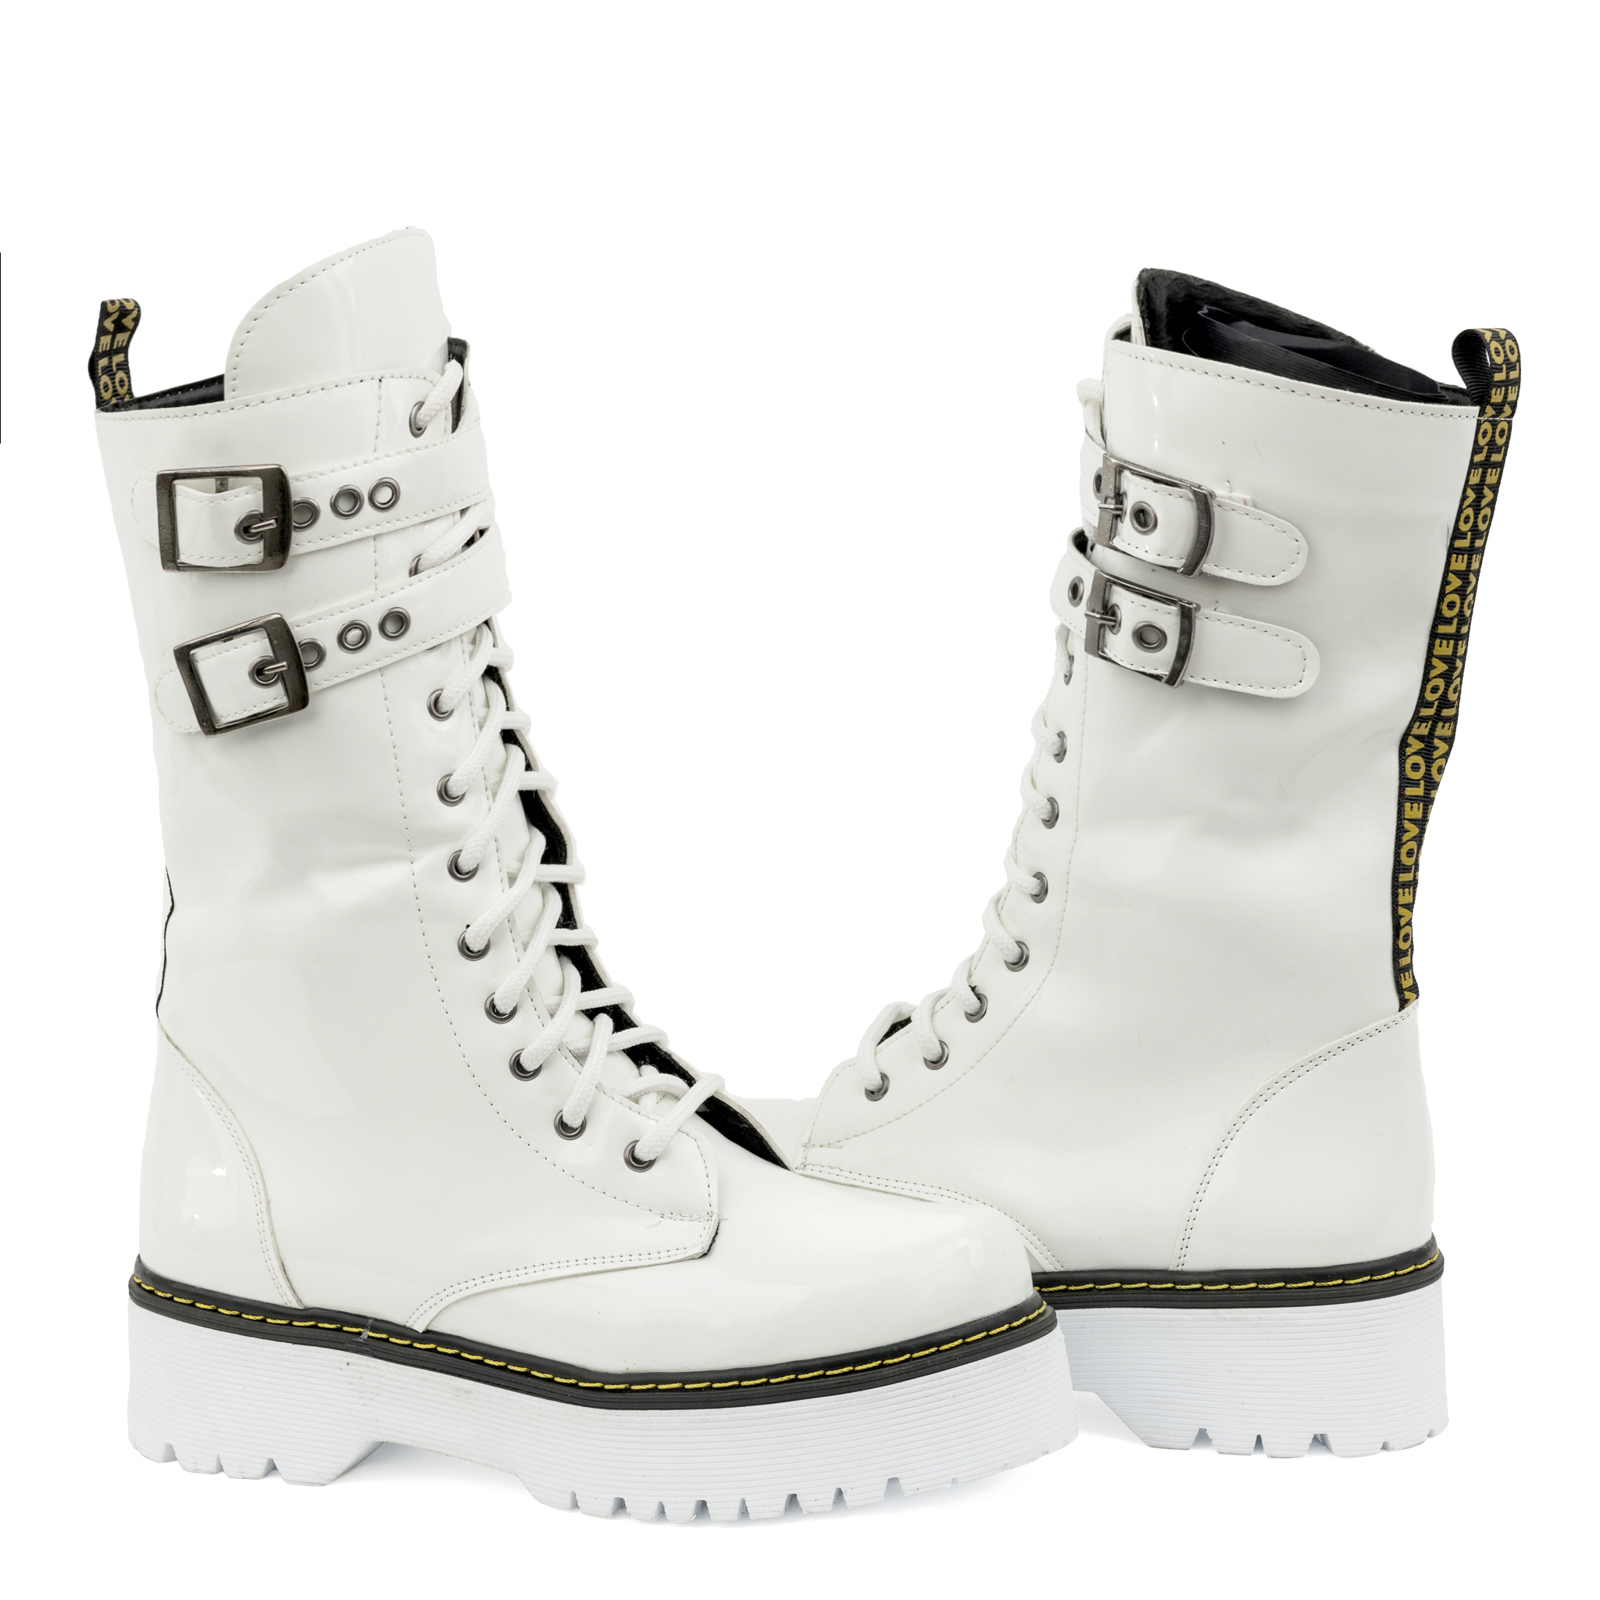 PATENT MARTIN BOOTS WITH YELLOW SEAM AND LACES - WHITE 